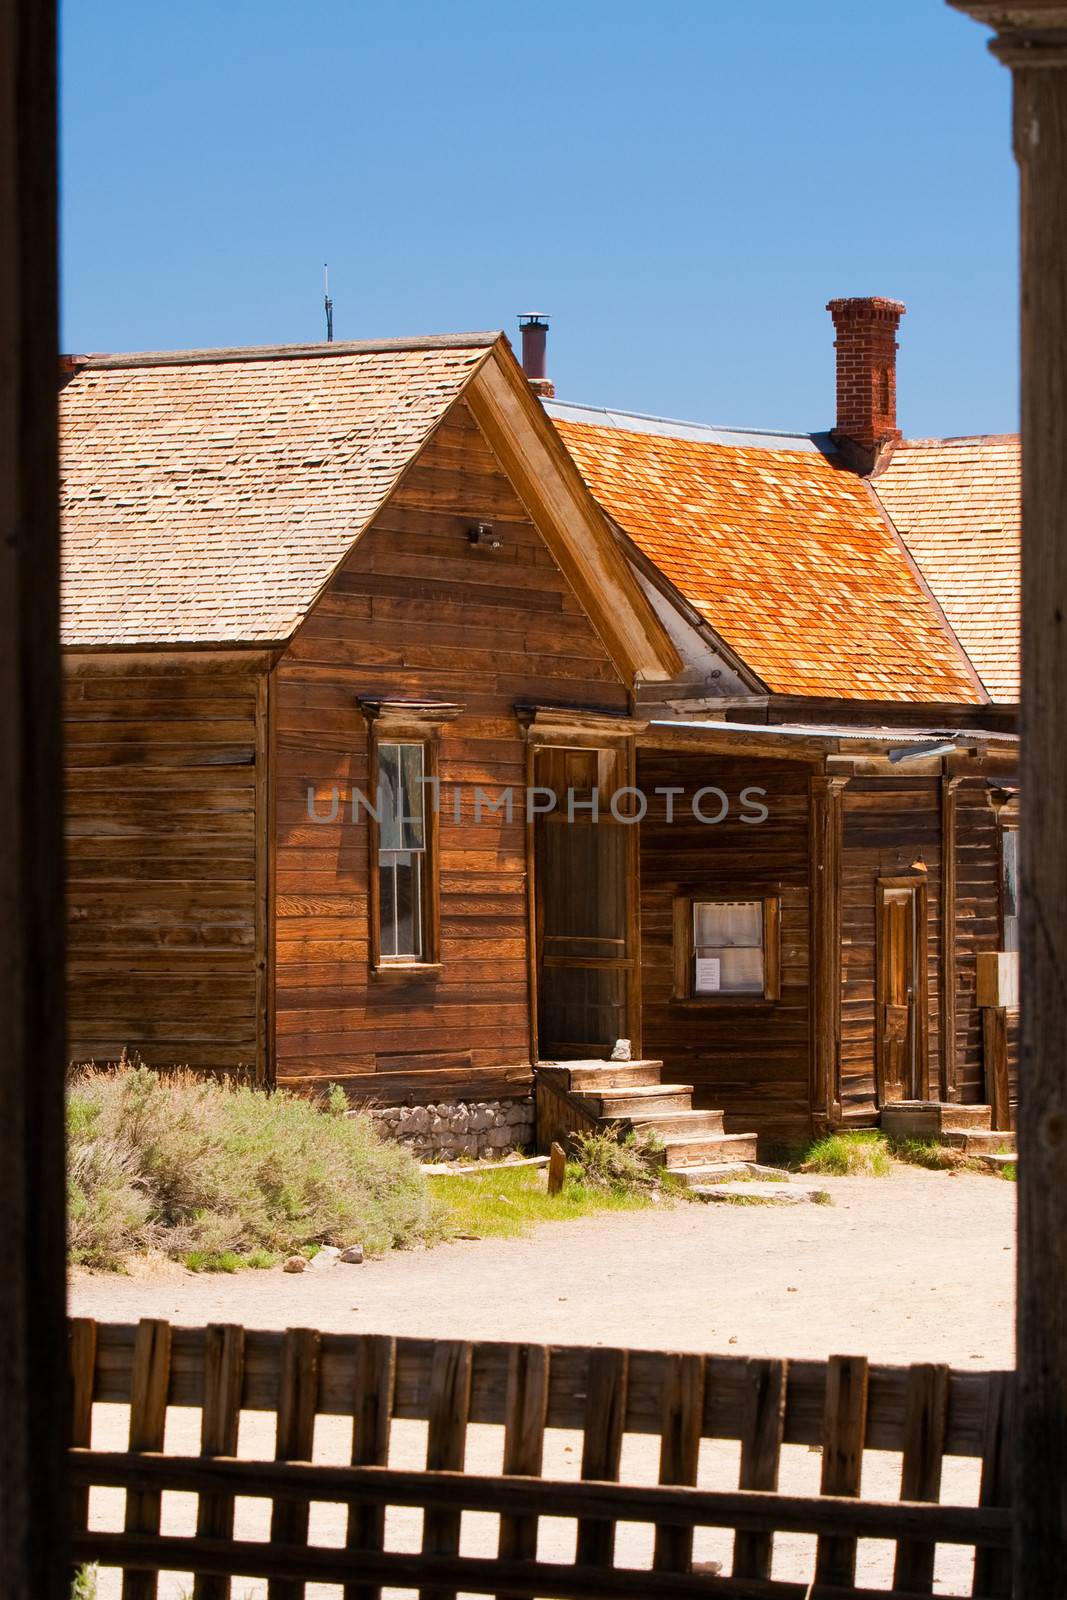 Bodie is an authentic Wild West ghost town in Bodie State Historic Park California, USA.